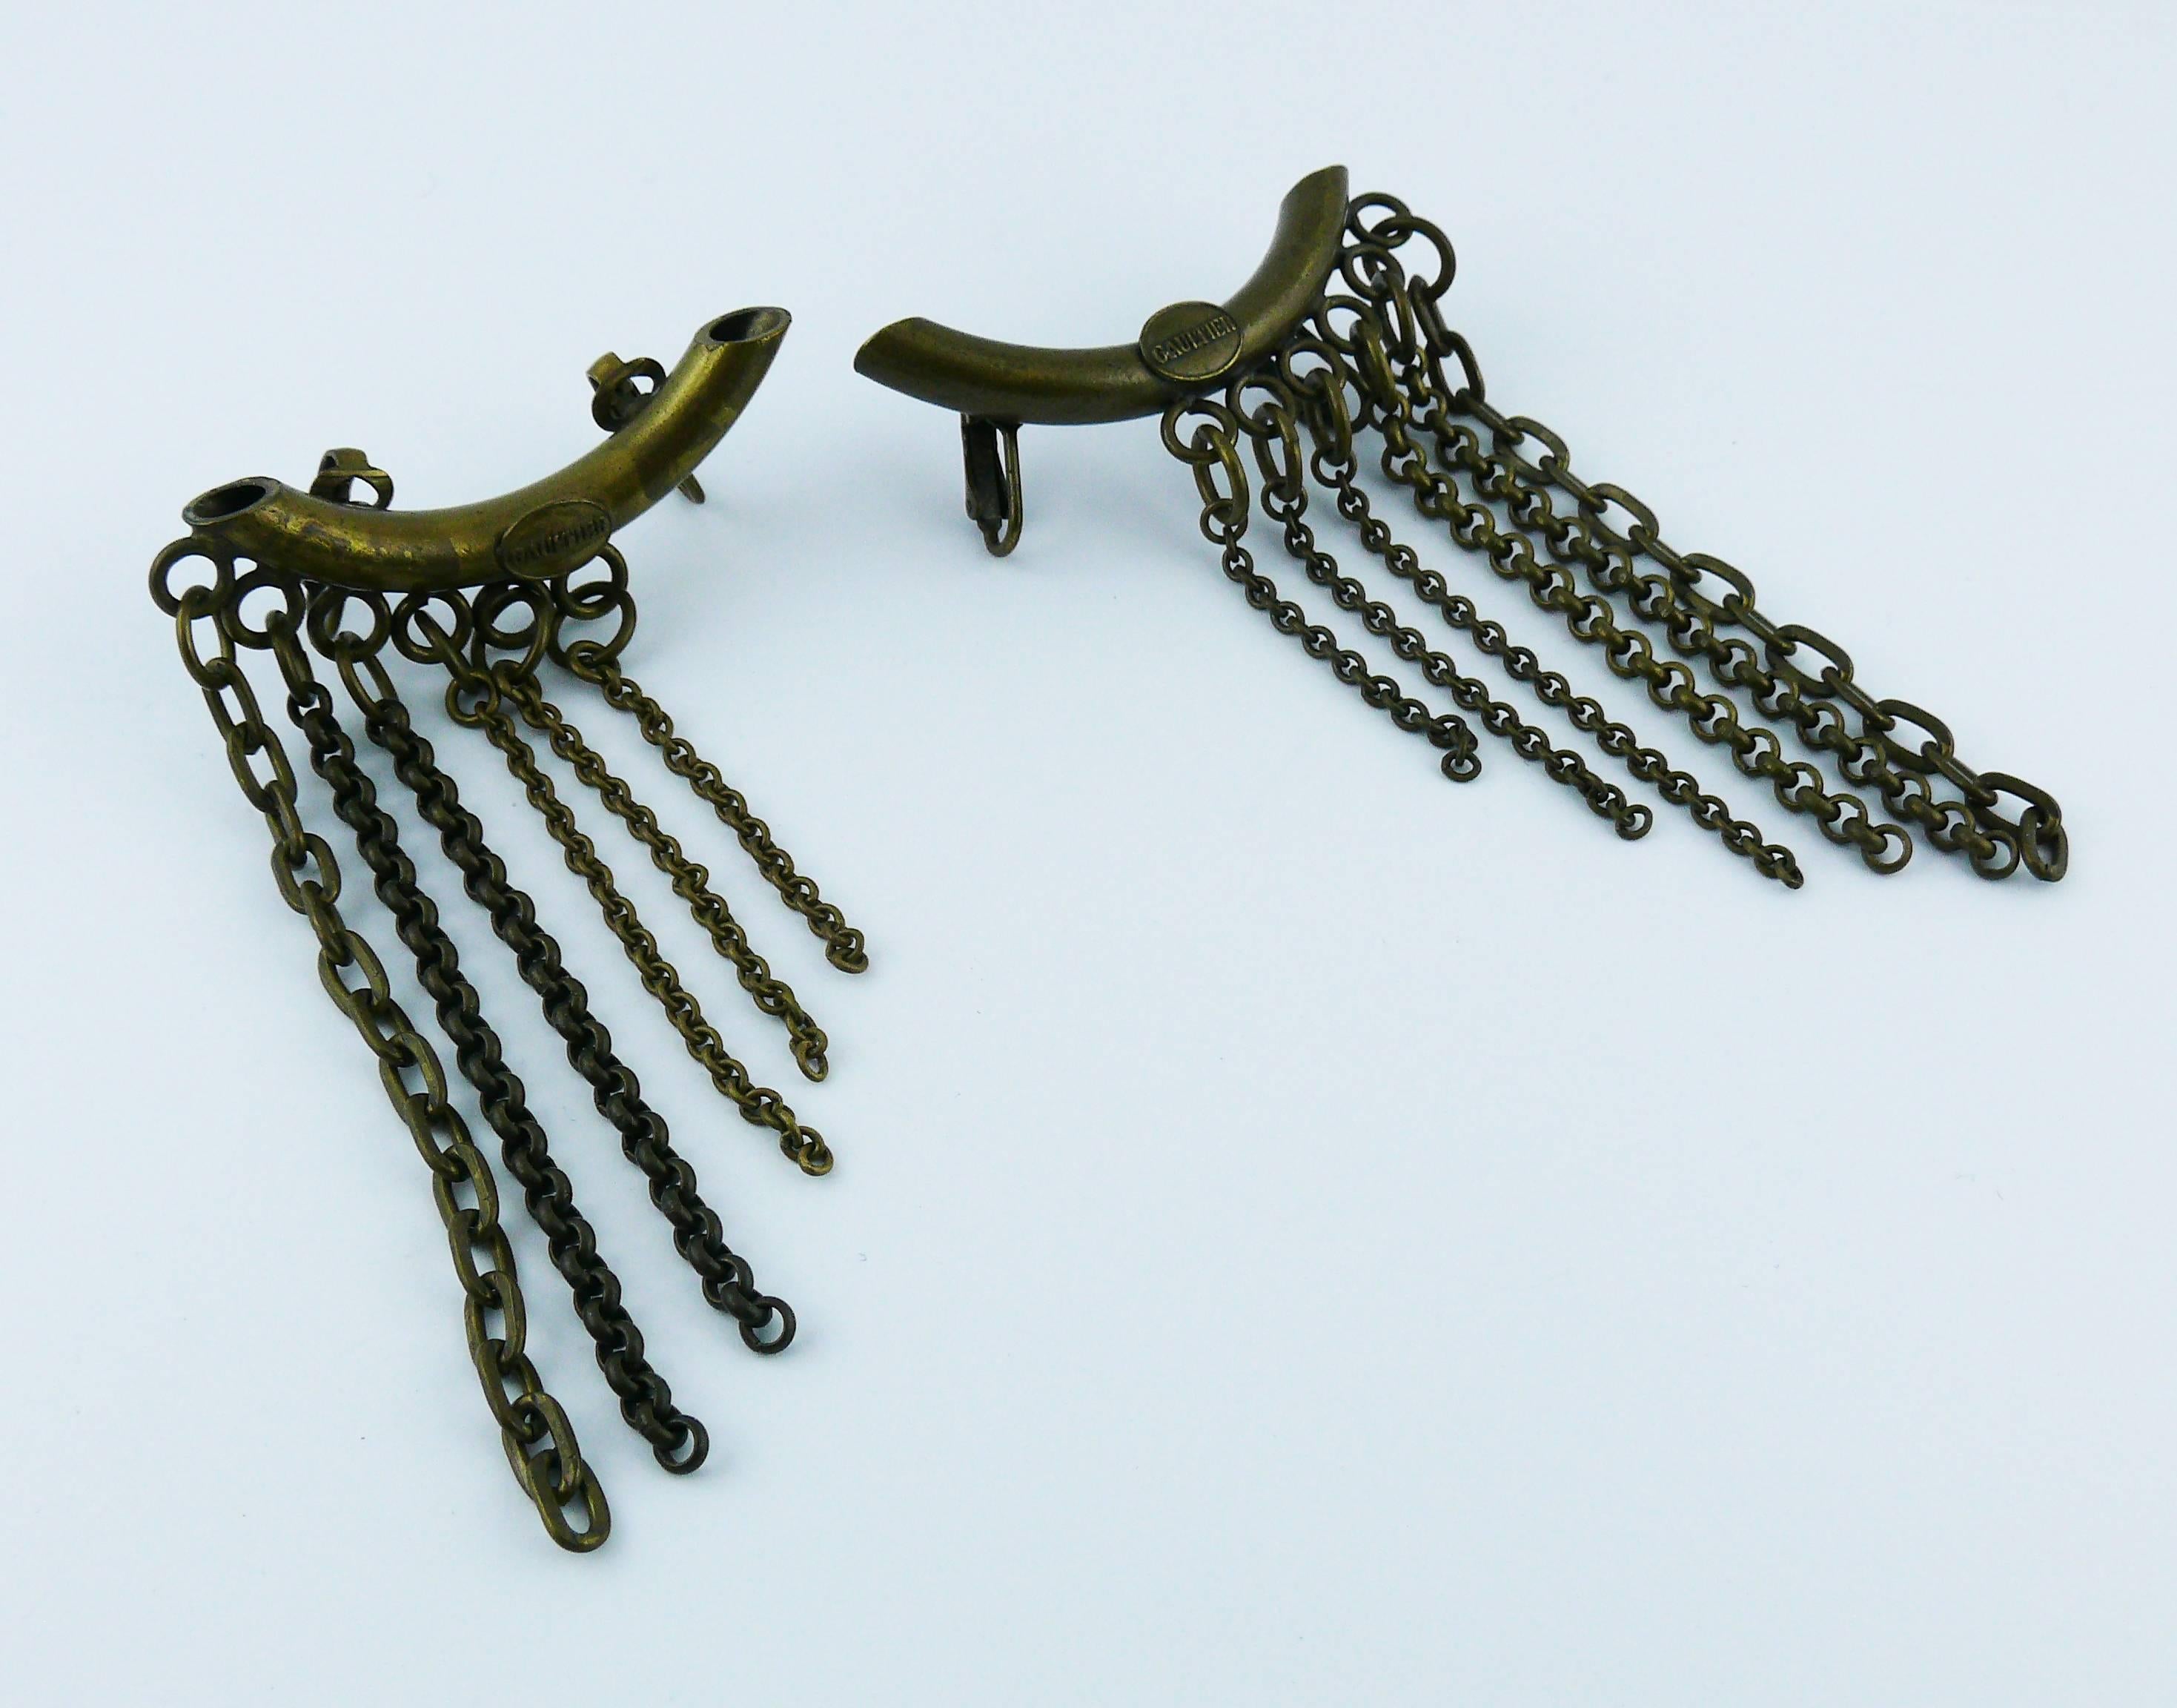 JEAN PAUL GAULTIER vintage rare antiqued bronze tone tubular ear cuffs embellished with chains.

Marked GAULTIER.

Indicative measurements : max. length approx. 9.4 cm (3.70 inches).

Comes with original dust bag (used condition).

JEWELRY CONDITION